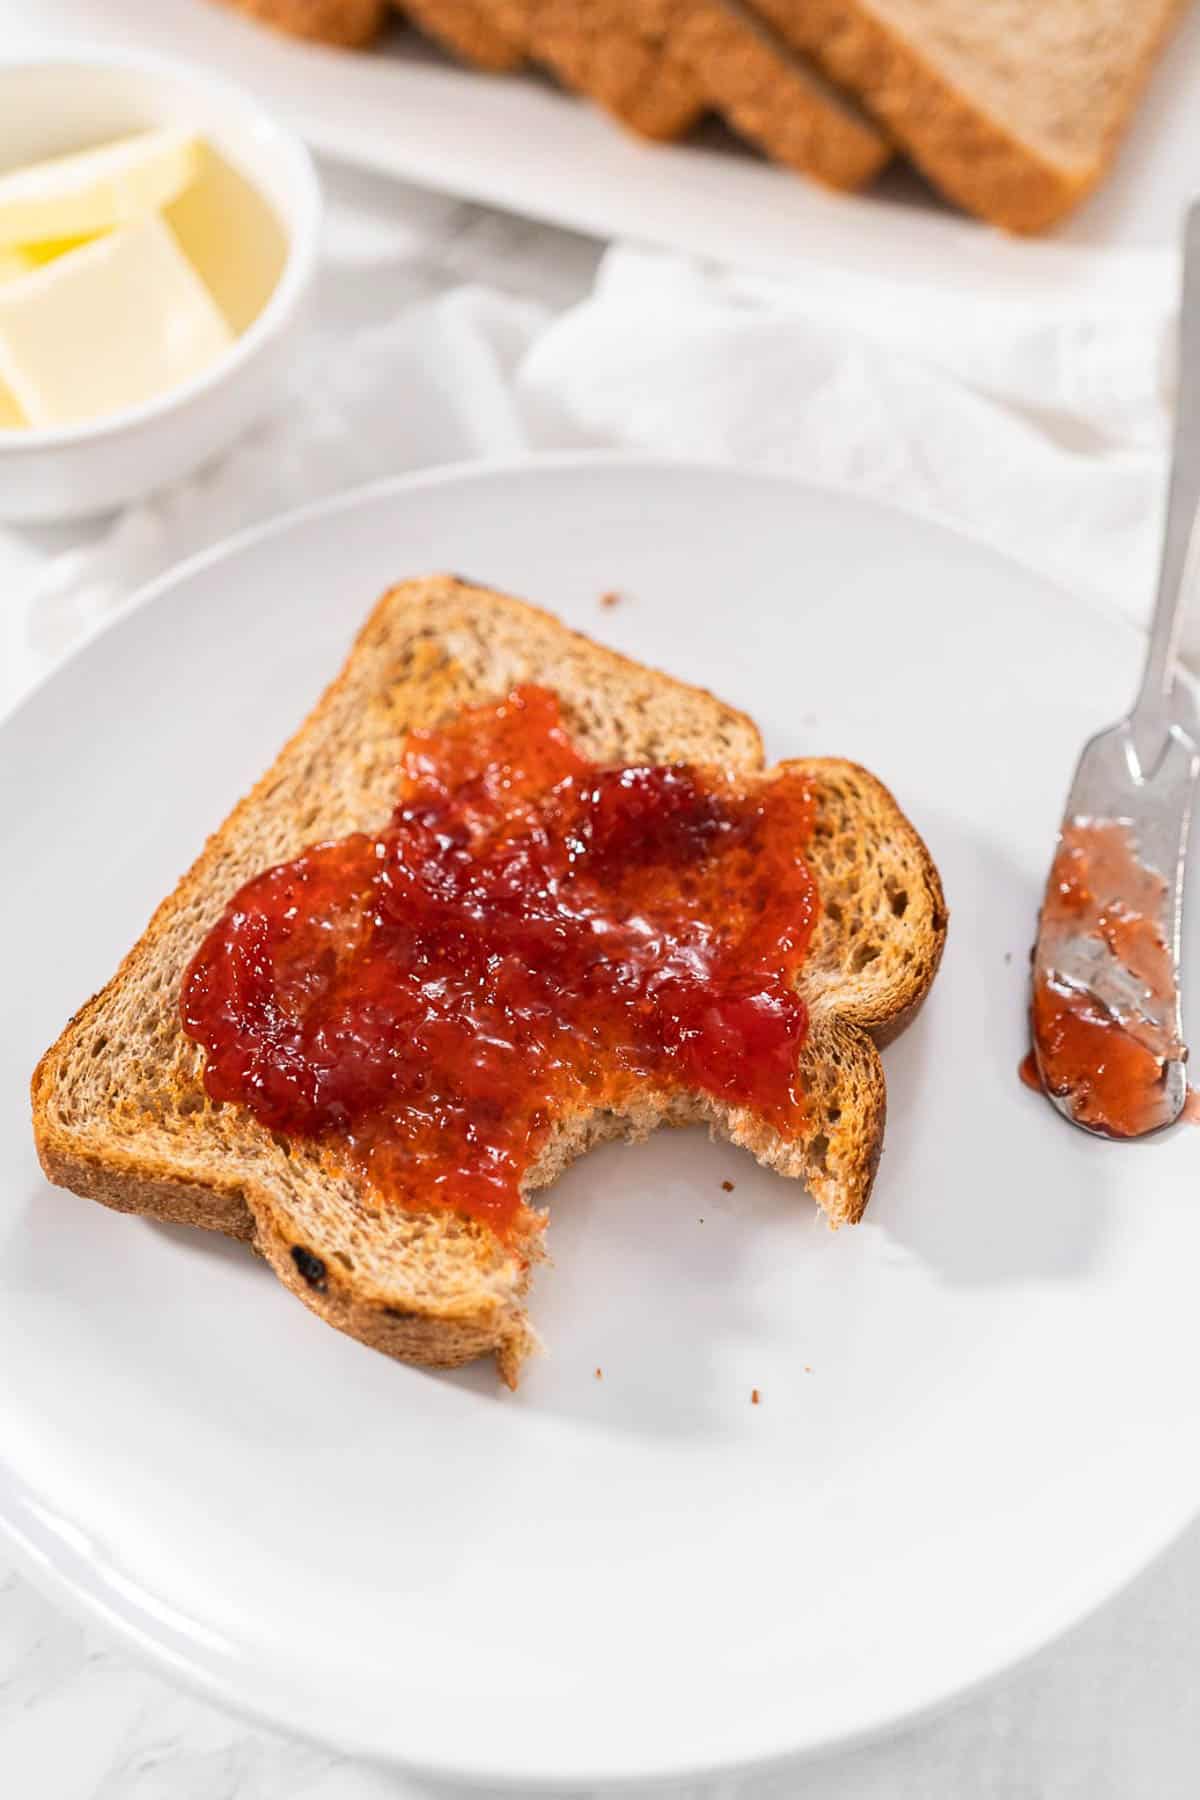 A piece of air fryer toast with strawberry jam on top with a bite taken out.